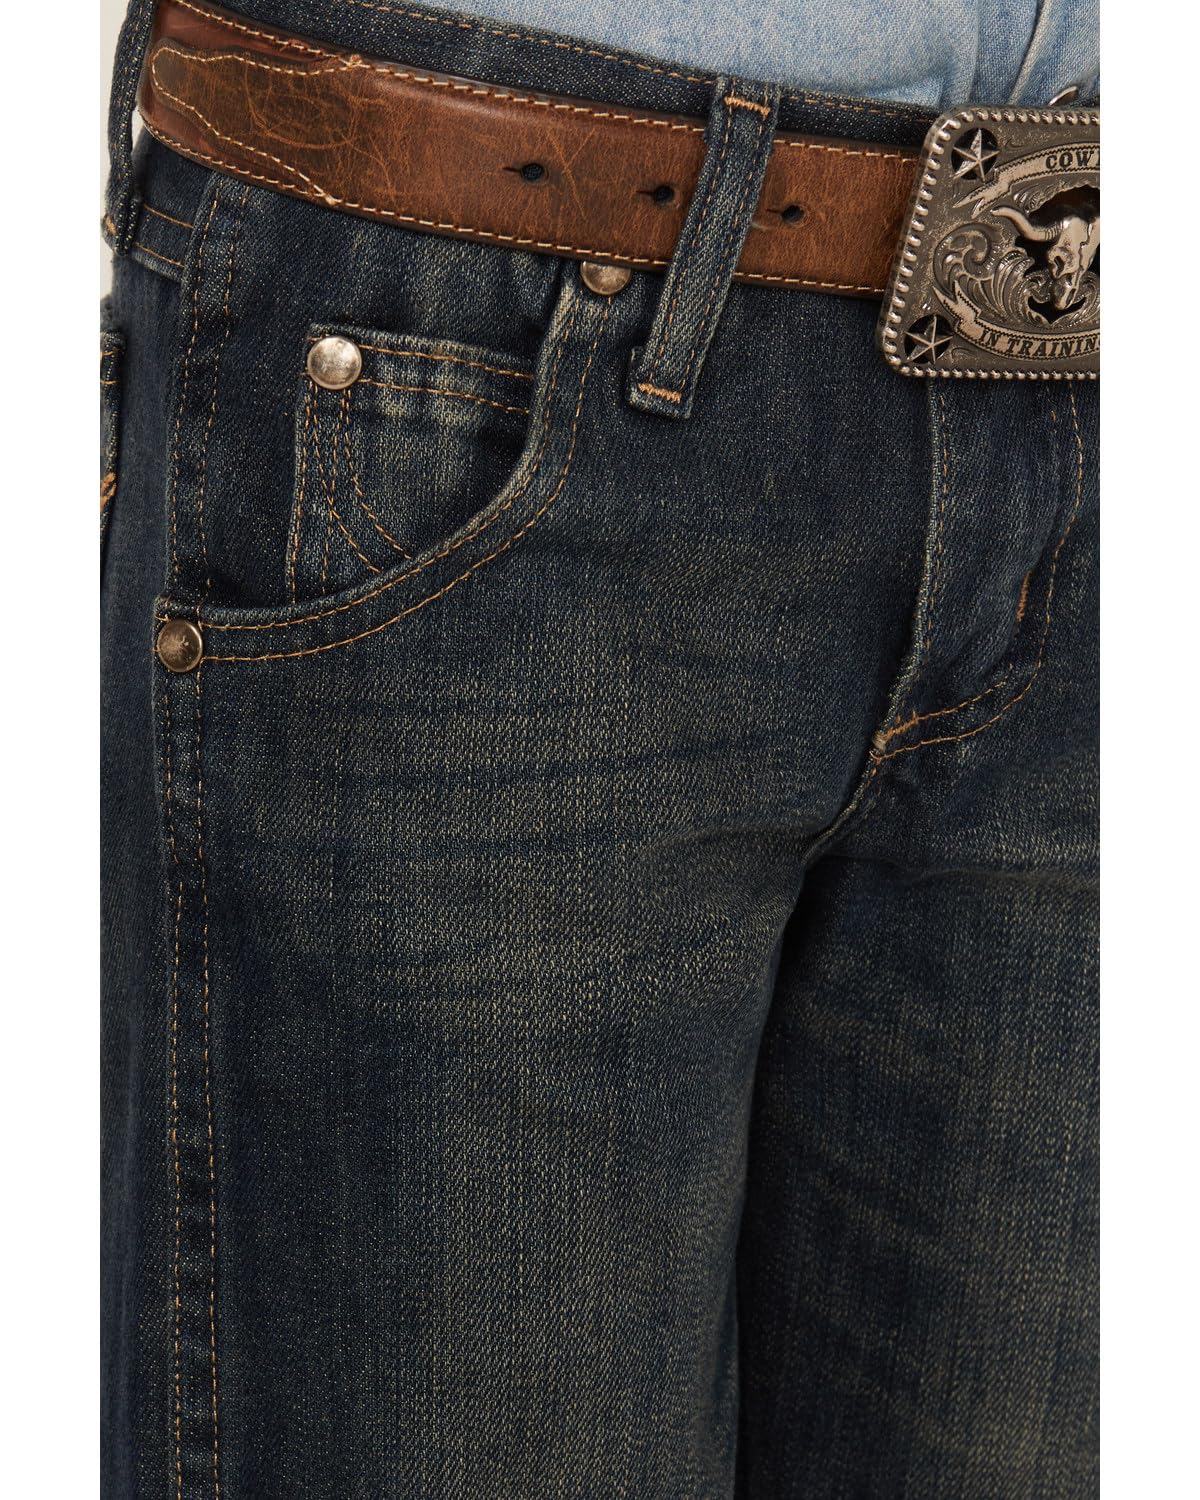 Wrangler Boys' Retro Relaxed Fit Boot Cut Jean